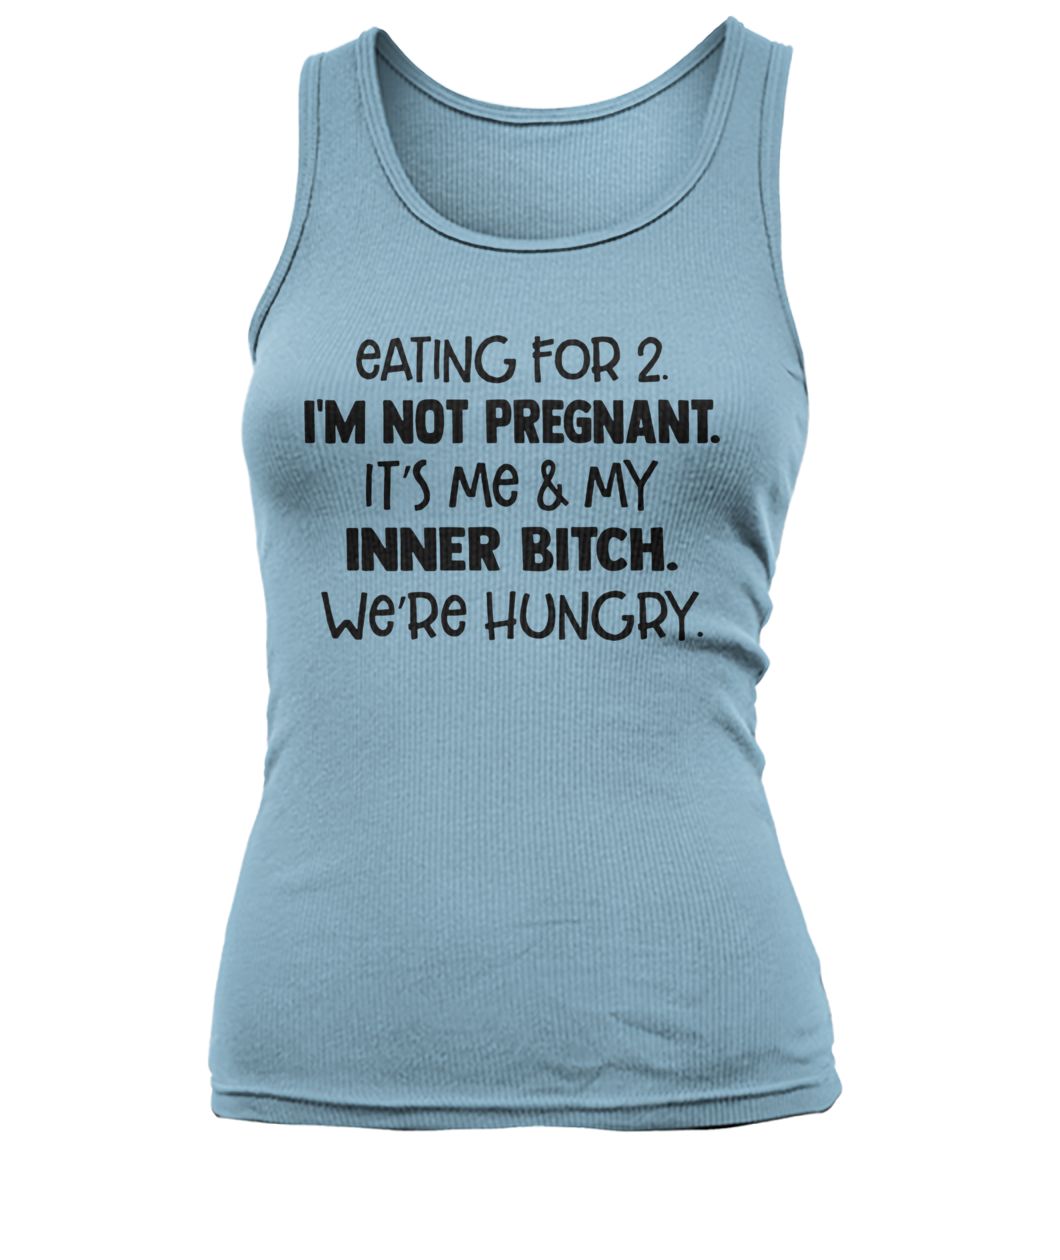 Eating for 2 I'm not pregnant it's me and my inner bitch we're hungry women's tank top